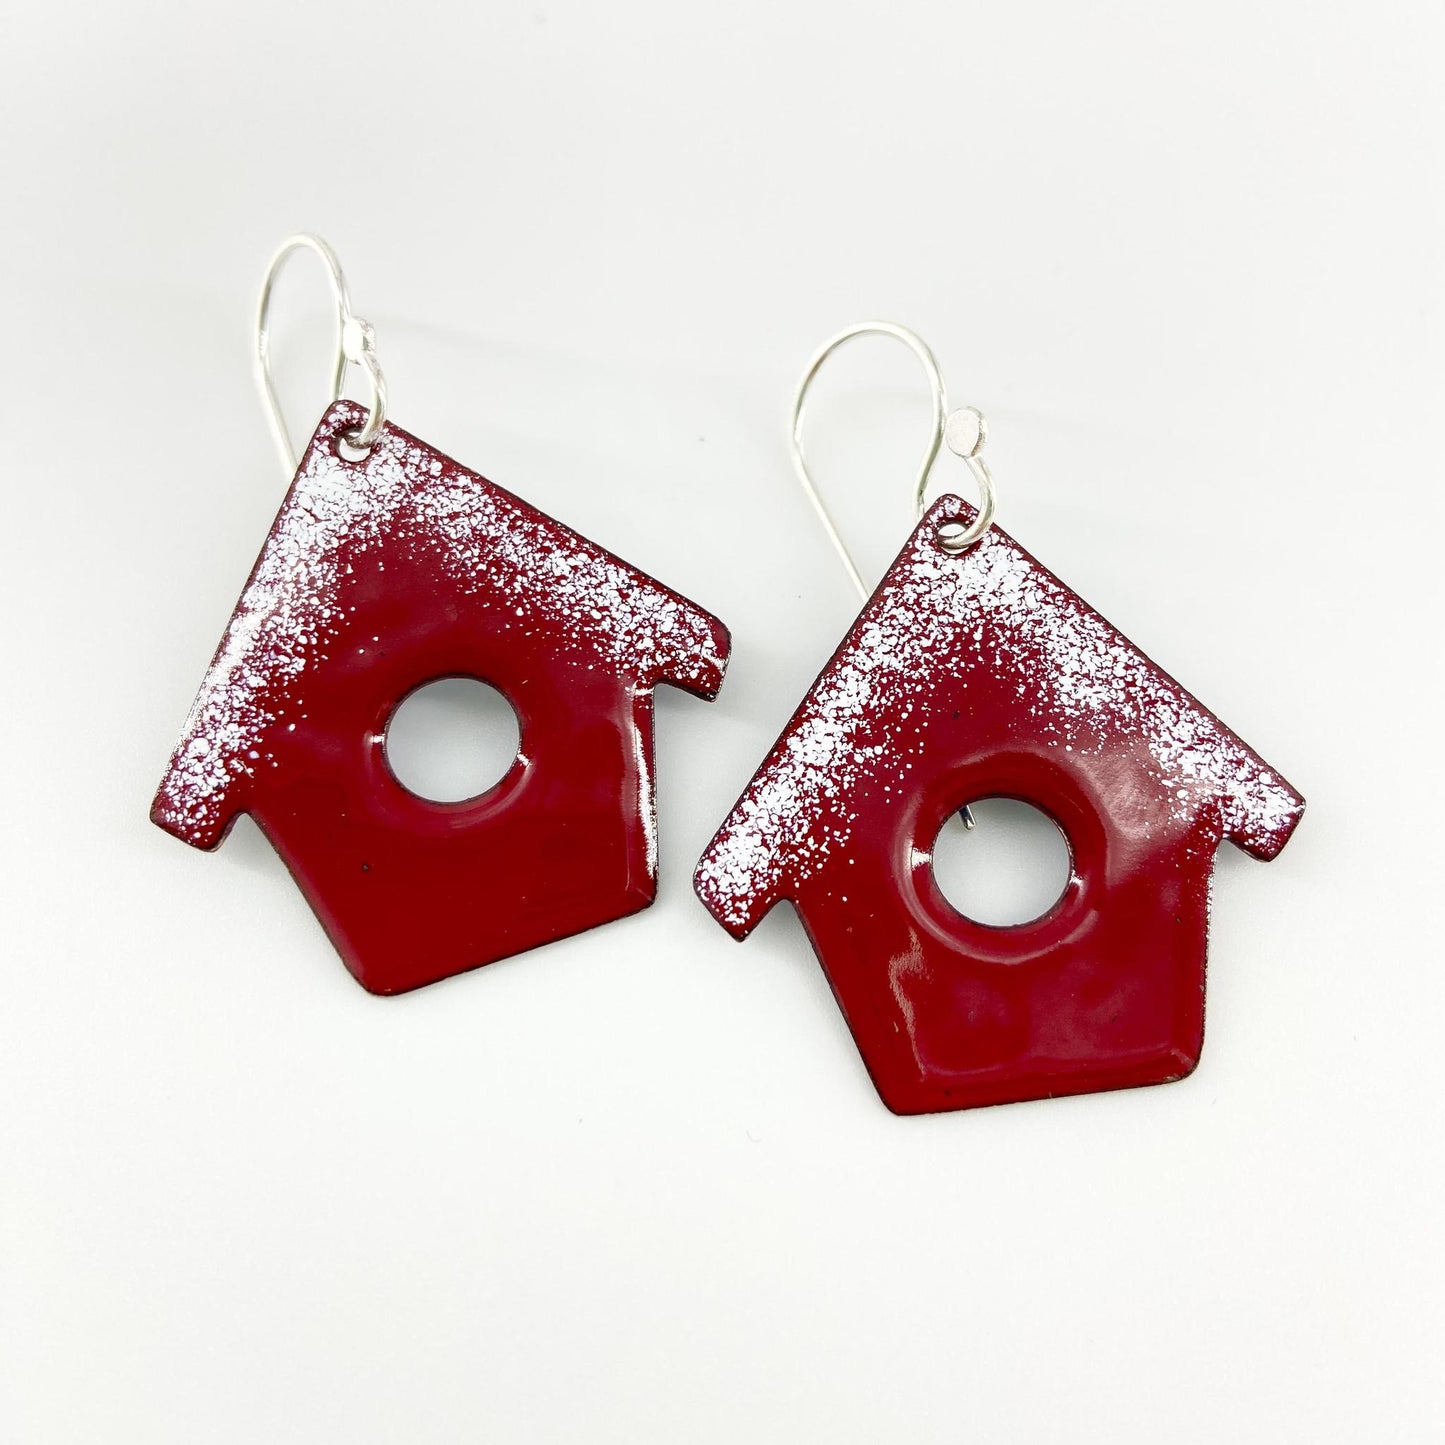 Earrings - Red Bird House with Snow - Enamel on Copper